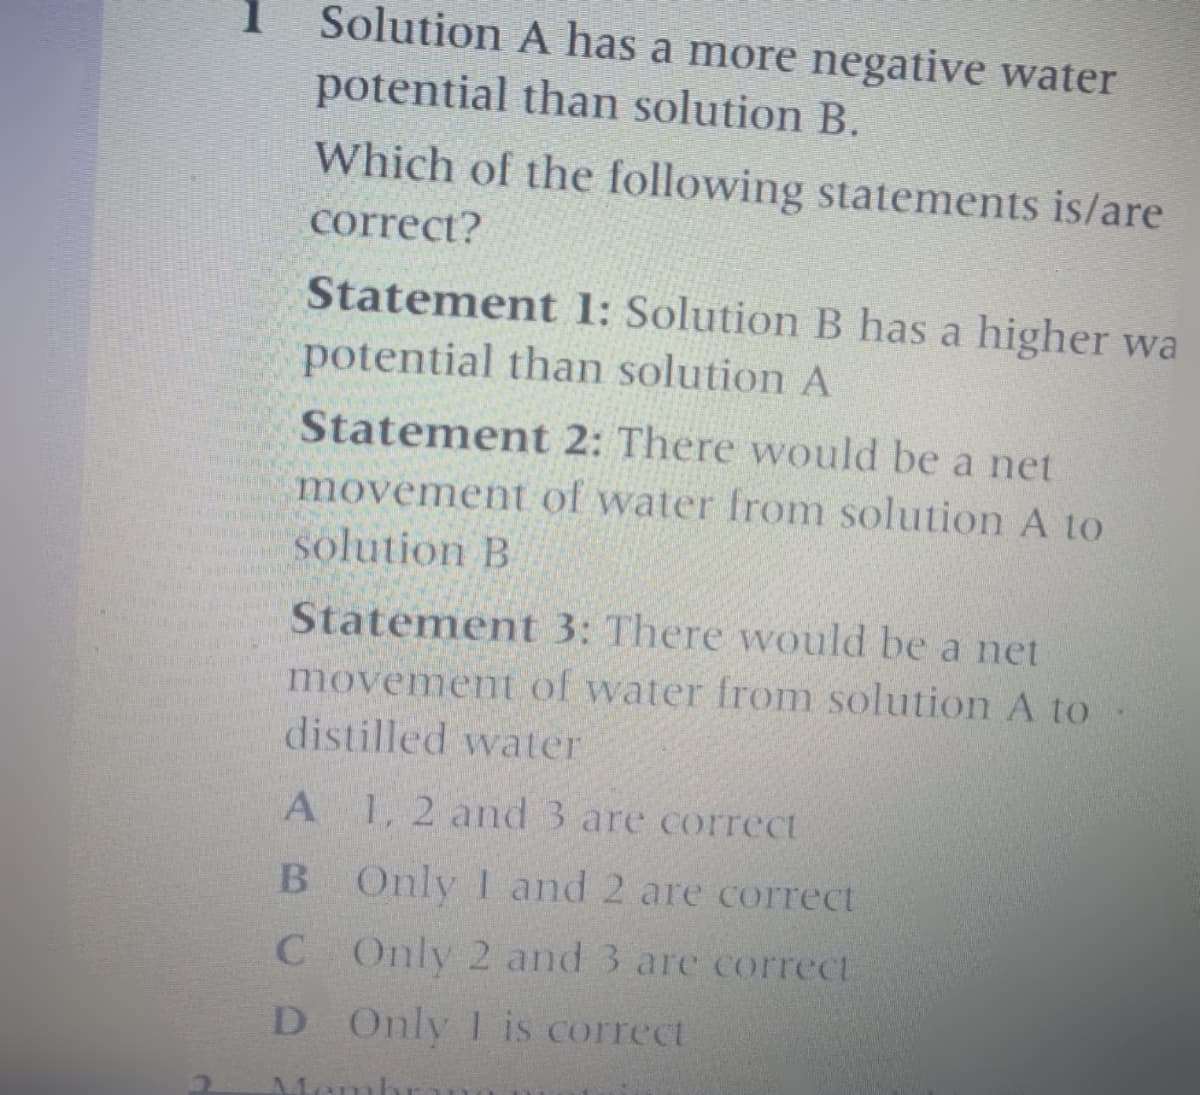 Solution A has a more negative water
potential than solution B.
Which of the following statements is/are
1
correct?
Statement 1: Solution B has a higher wa
potential than solution A
Statement 2: There would be a net
movement of water from solution A to
solution B
Statement 3: There would be a net
movement of water from solution A to
distilled water
A
1,2 and 3 are correct
B Only 1 and 2 are correct
C Only 2 and 3 are correct
D Only 1is correct
Memb
